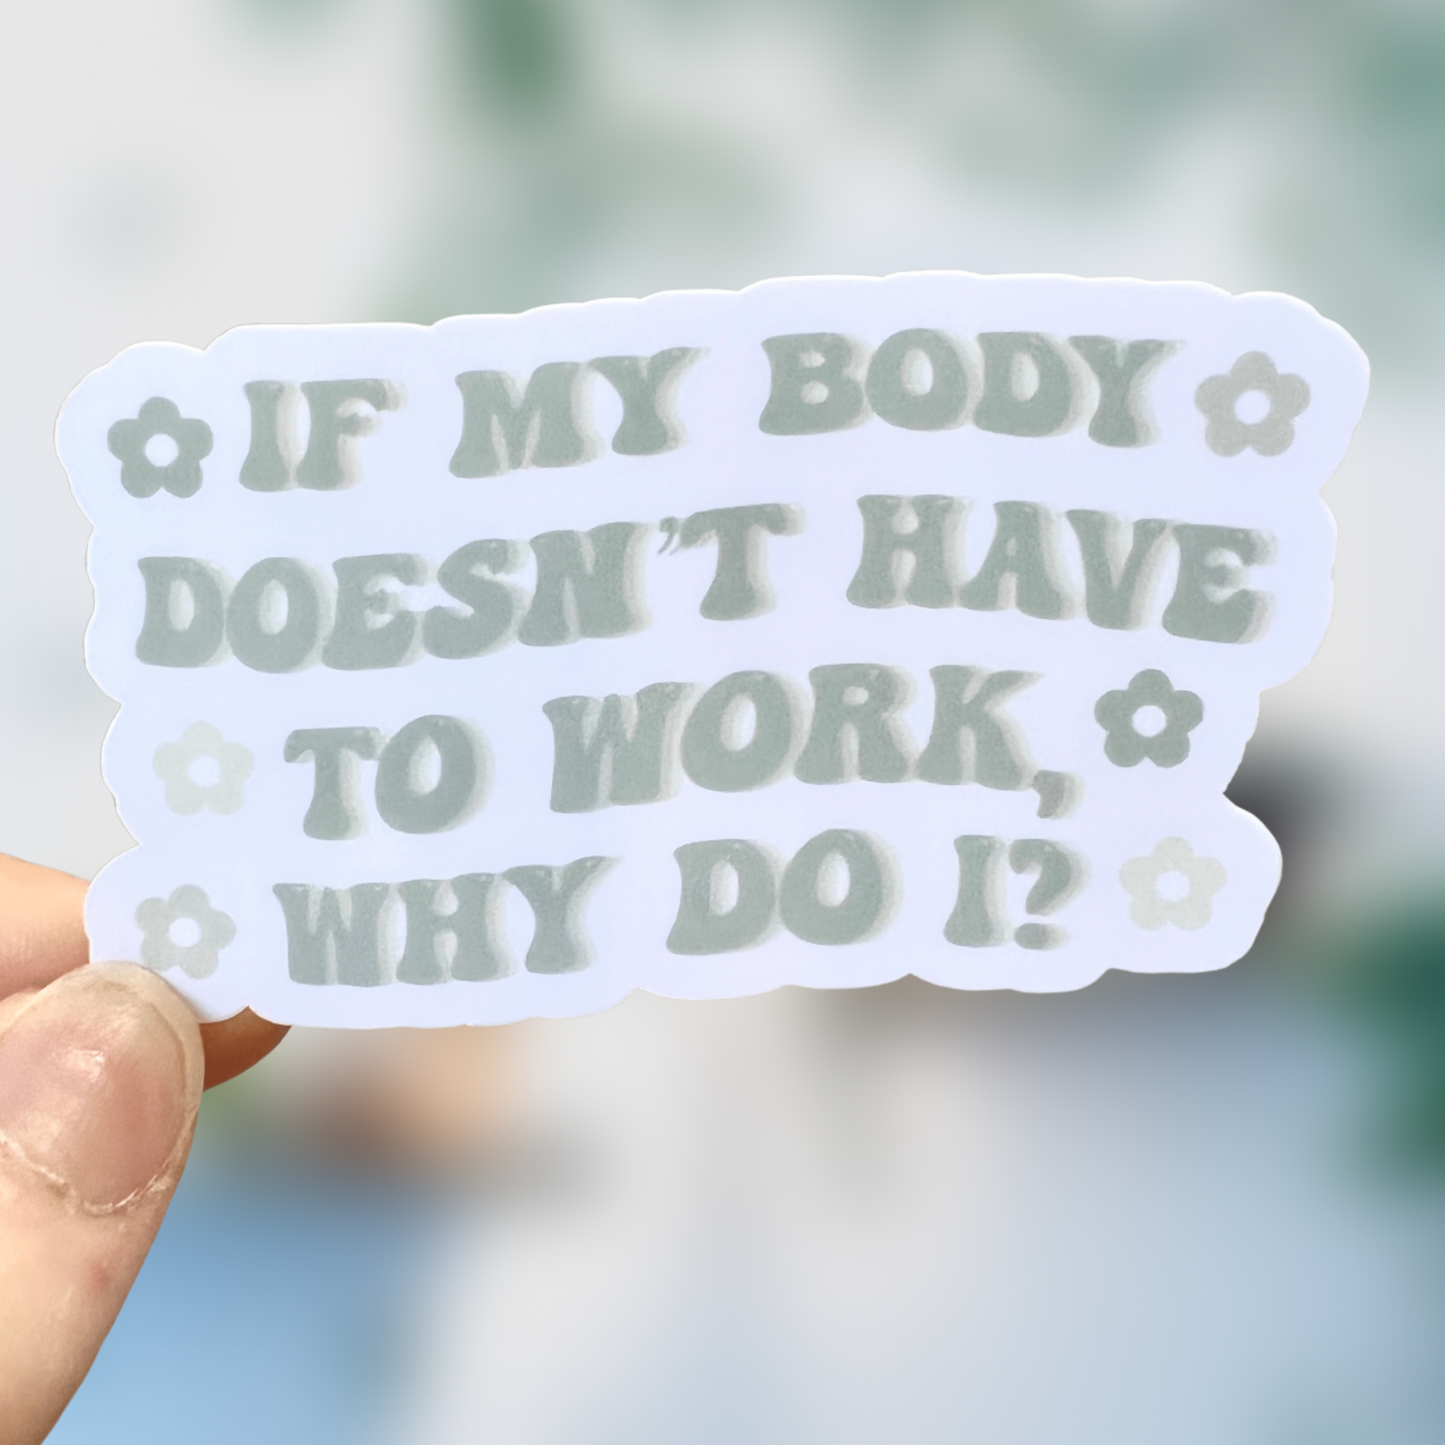 If My Body Doesn’t Have To Work, Why Do I? Sticker